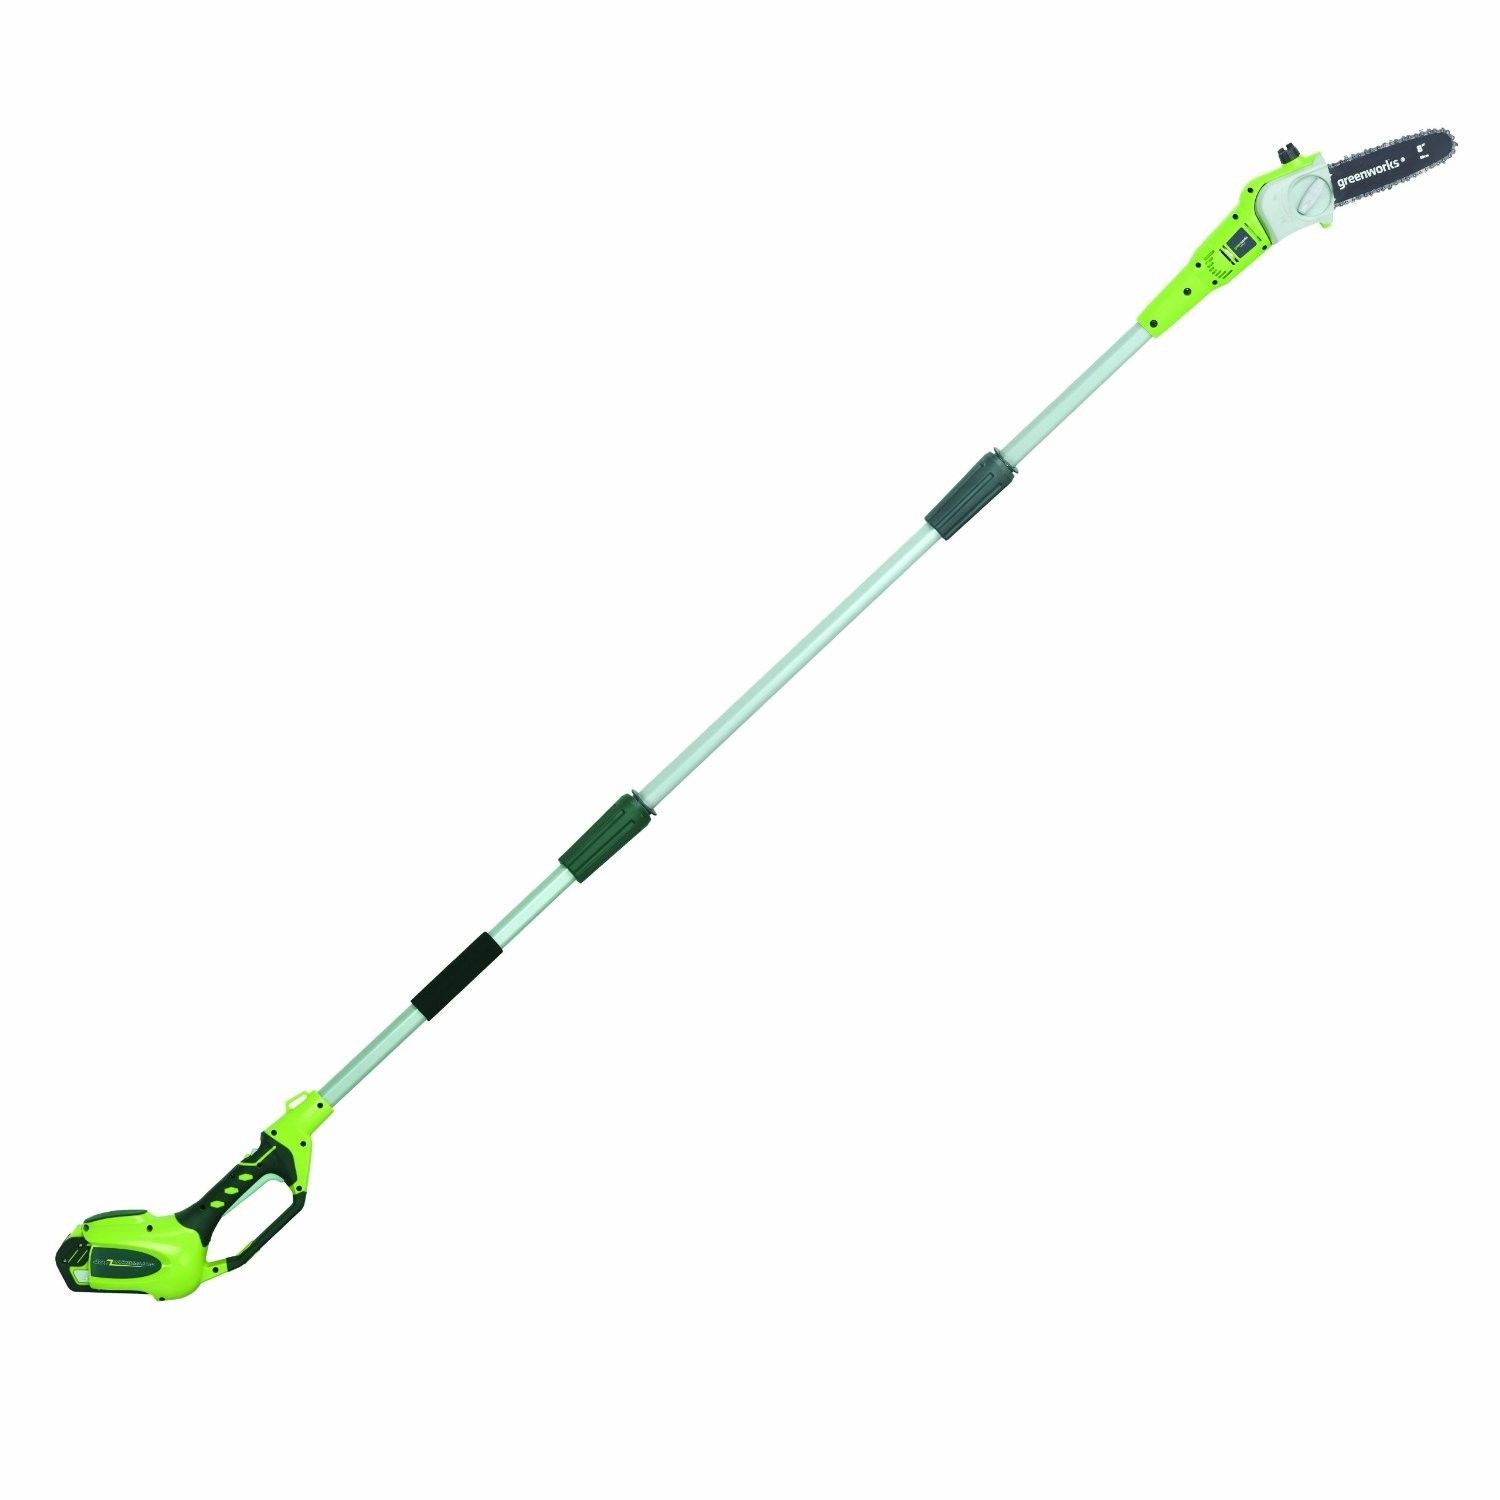 GreenWorks 20672 40V G-MAX Cordless Lithium-Ion Polesaw with 8-inch Bar & Chain